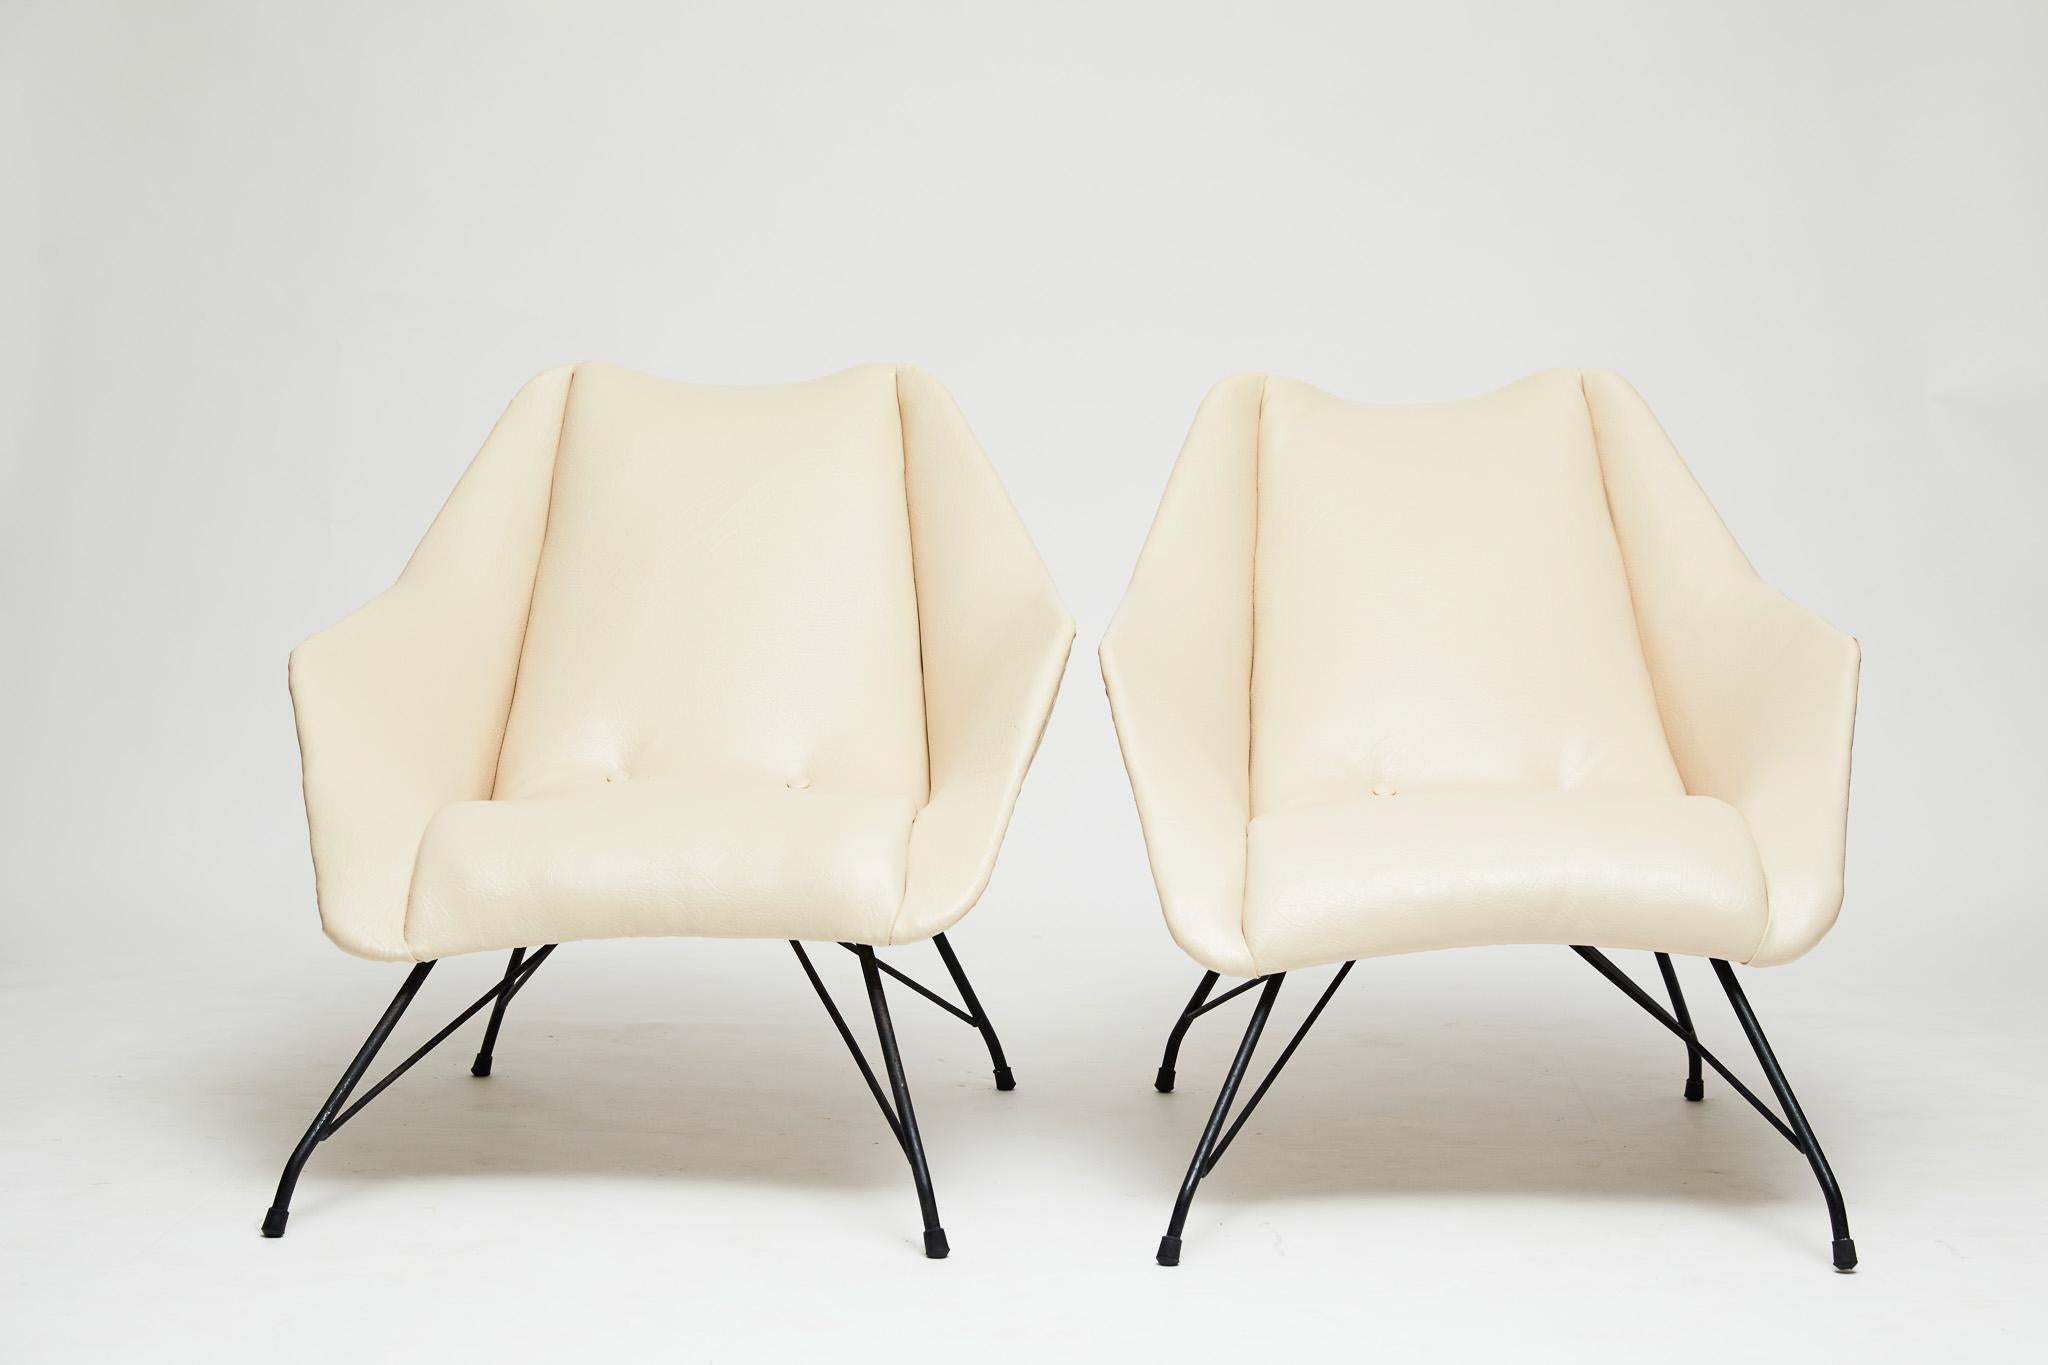 Brazilian Midcentury Armchairs in White Leather & Iron Base by Carlo Hauner, 1955, Brazil For Sale